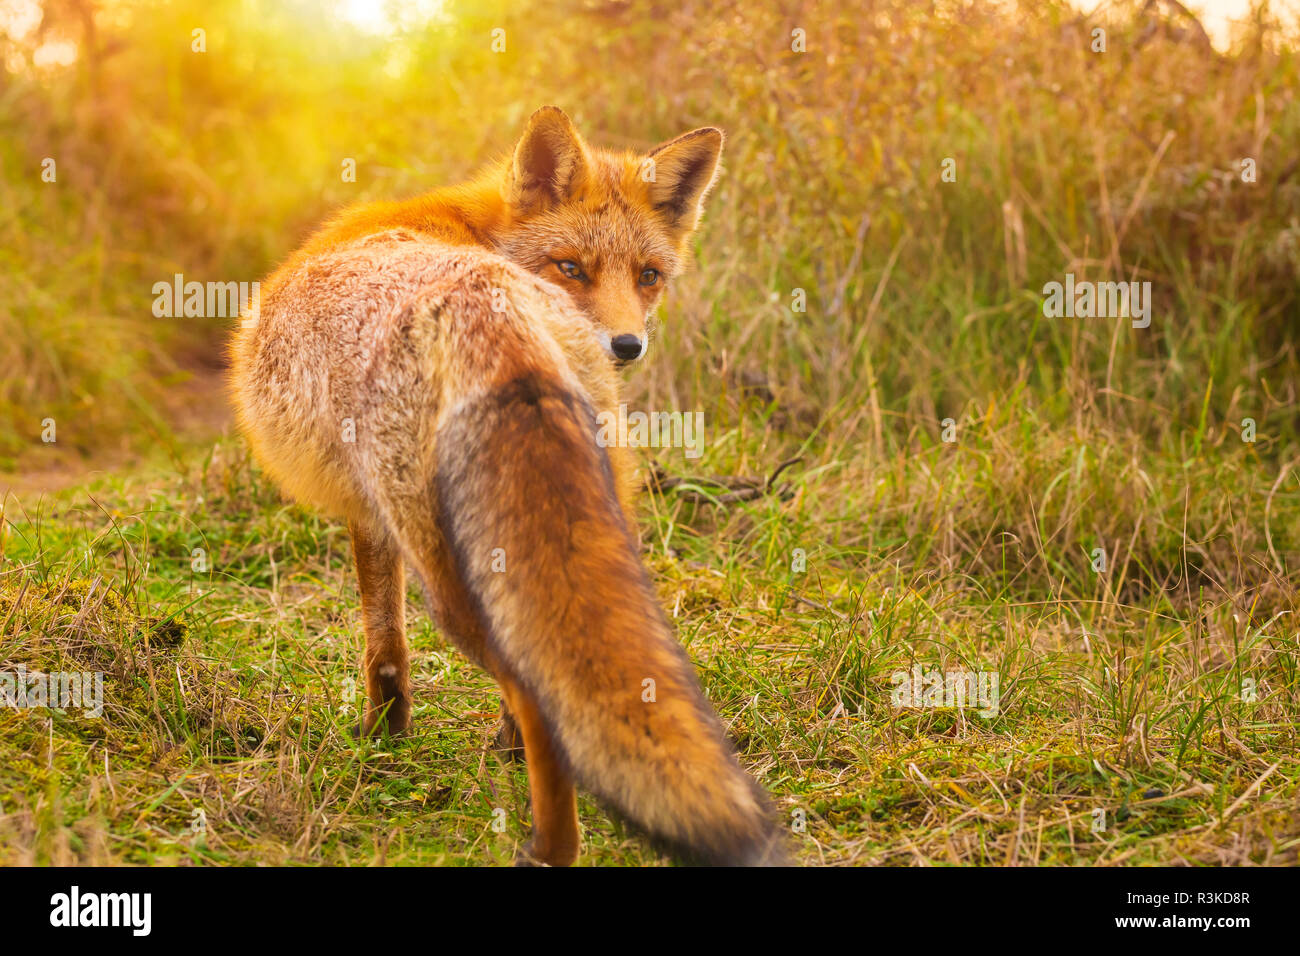 Wild young red fox (vulpes vulpes) vixen scavenging in a forest and dunes during sunset Stock Photo